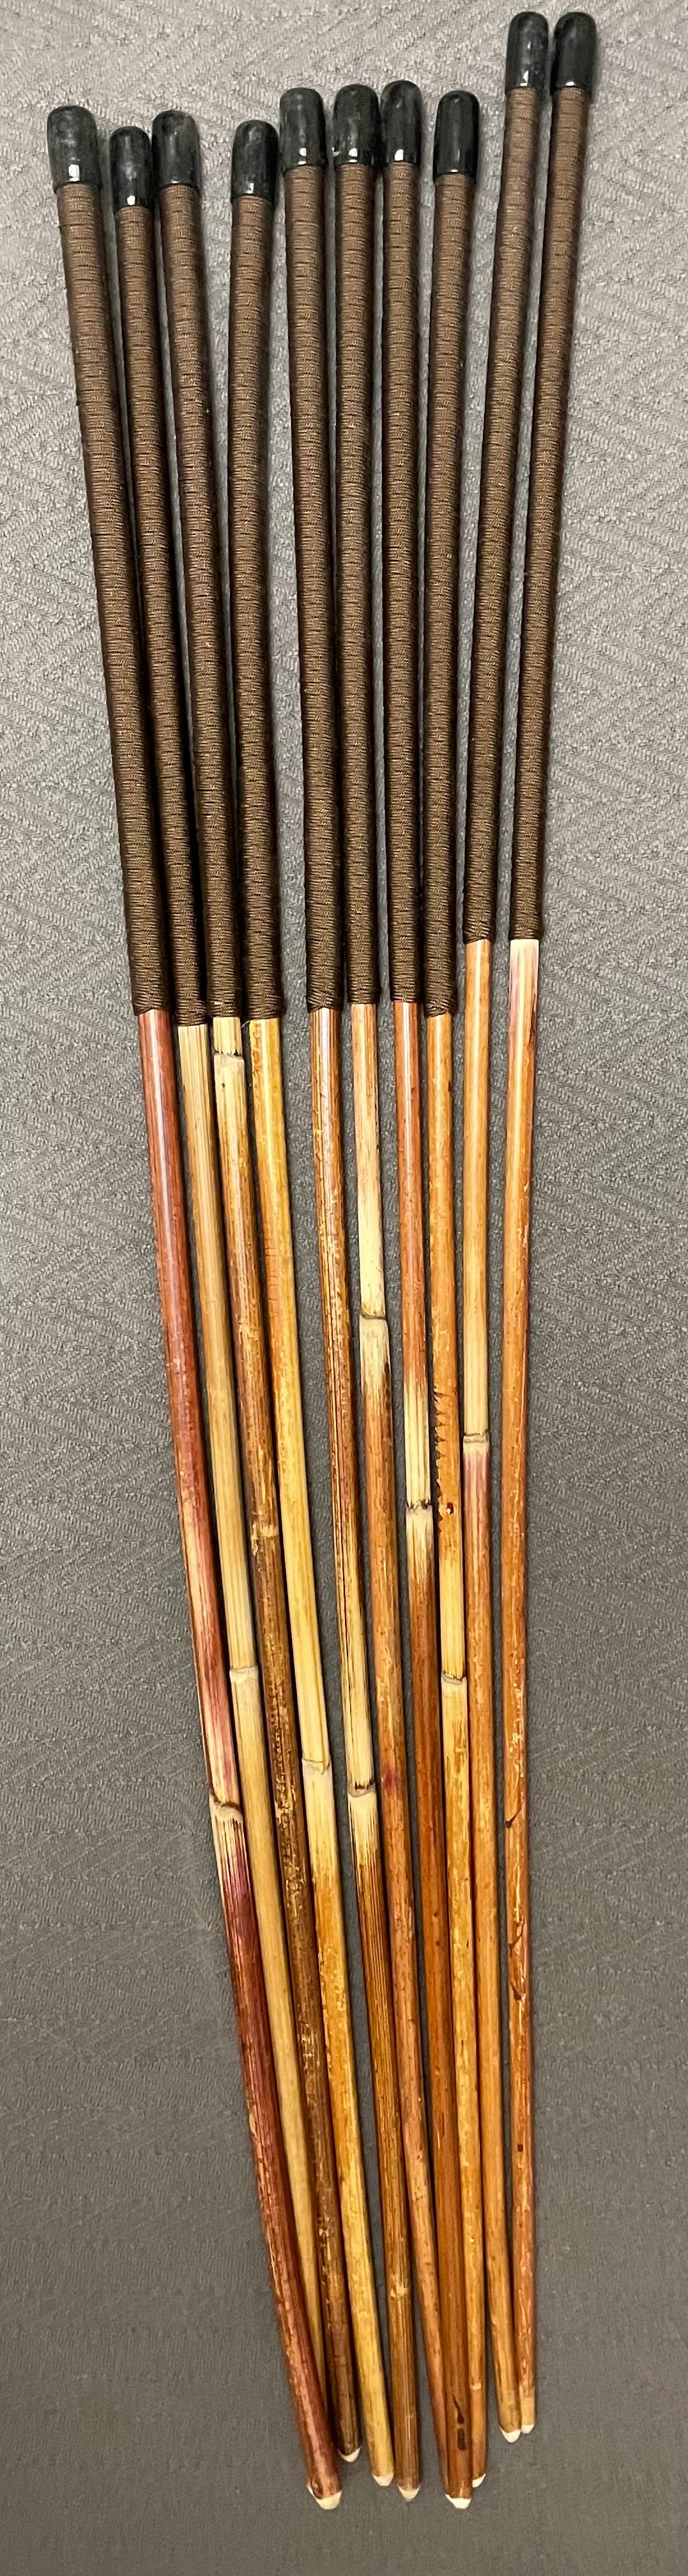 Set of 10 Classic Dragon Rattan Punishment Canes with Brown Paracord Handles - 95 cms Length - Sales Special